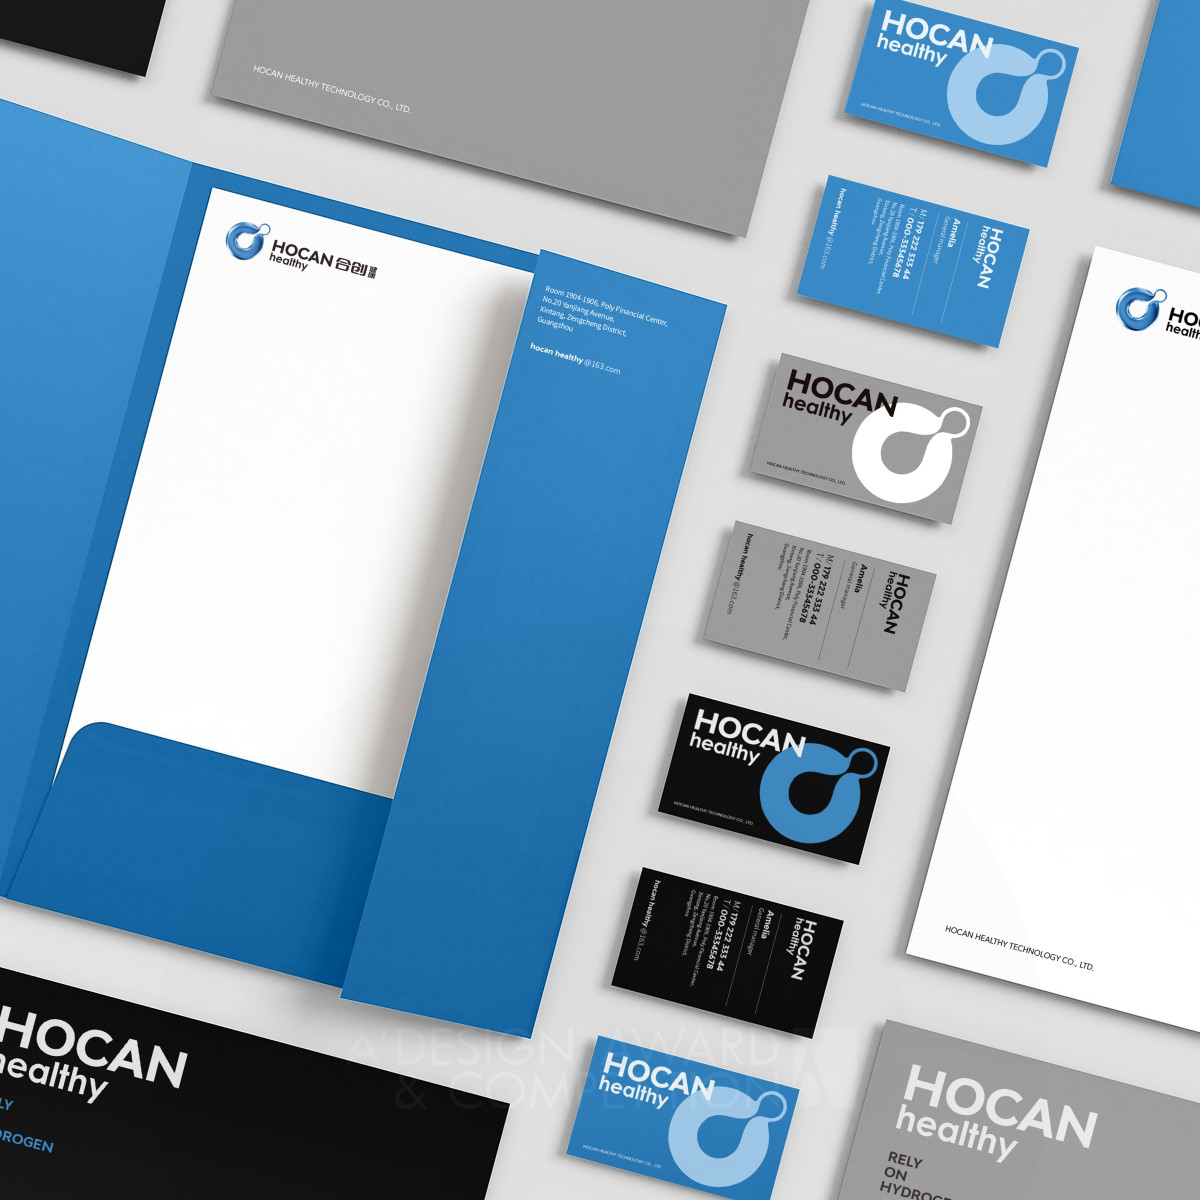 Hocan Healthy Corporate Identity by Guangzhou Cheung Ying Design Co. Ltd. Bronze Graphics, Illustration and Visual Communication Design Award Winner 2022 